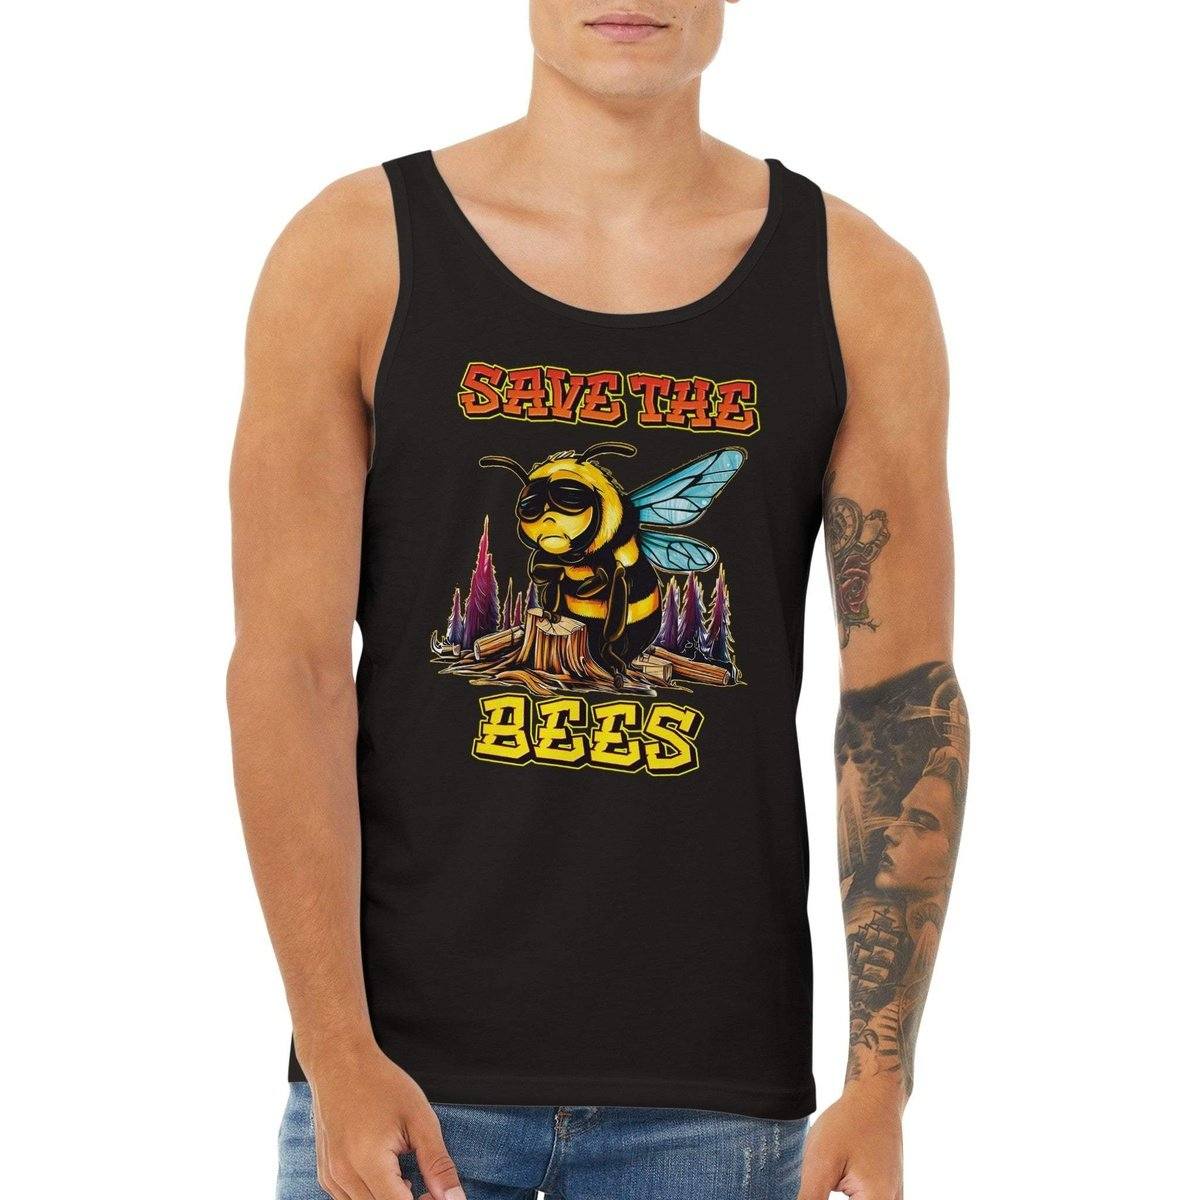 Save The Bees Tank Top - Crying Bee - Premium Unisex Tank Top Australia Online Color Black / XS